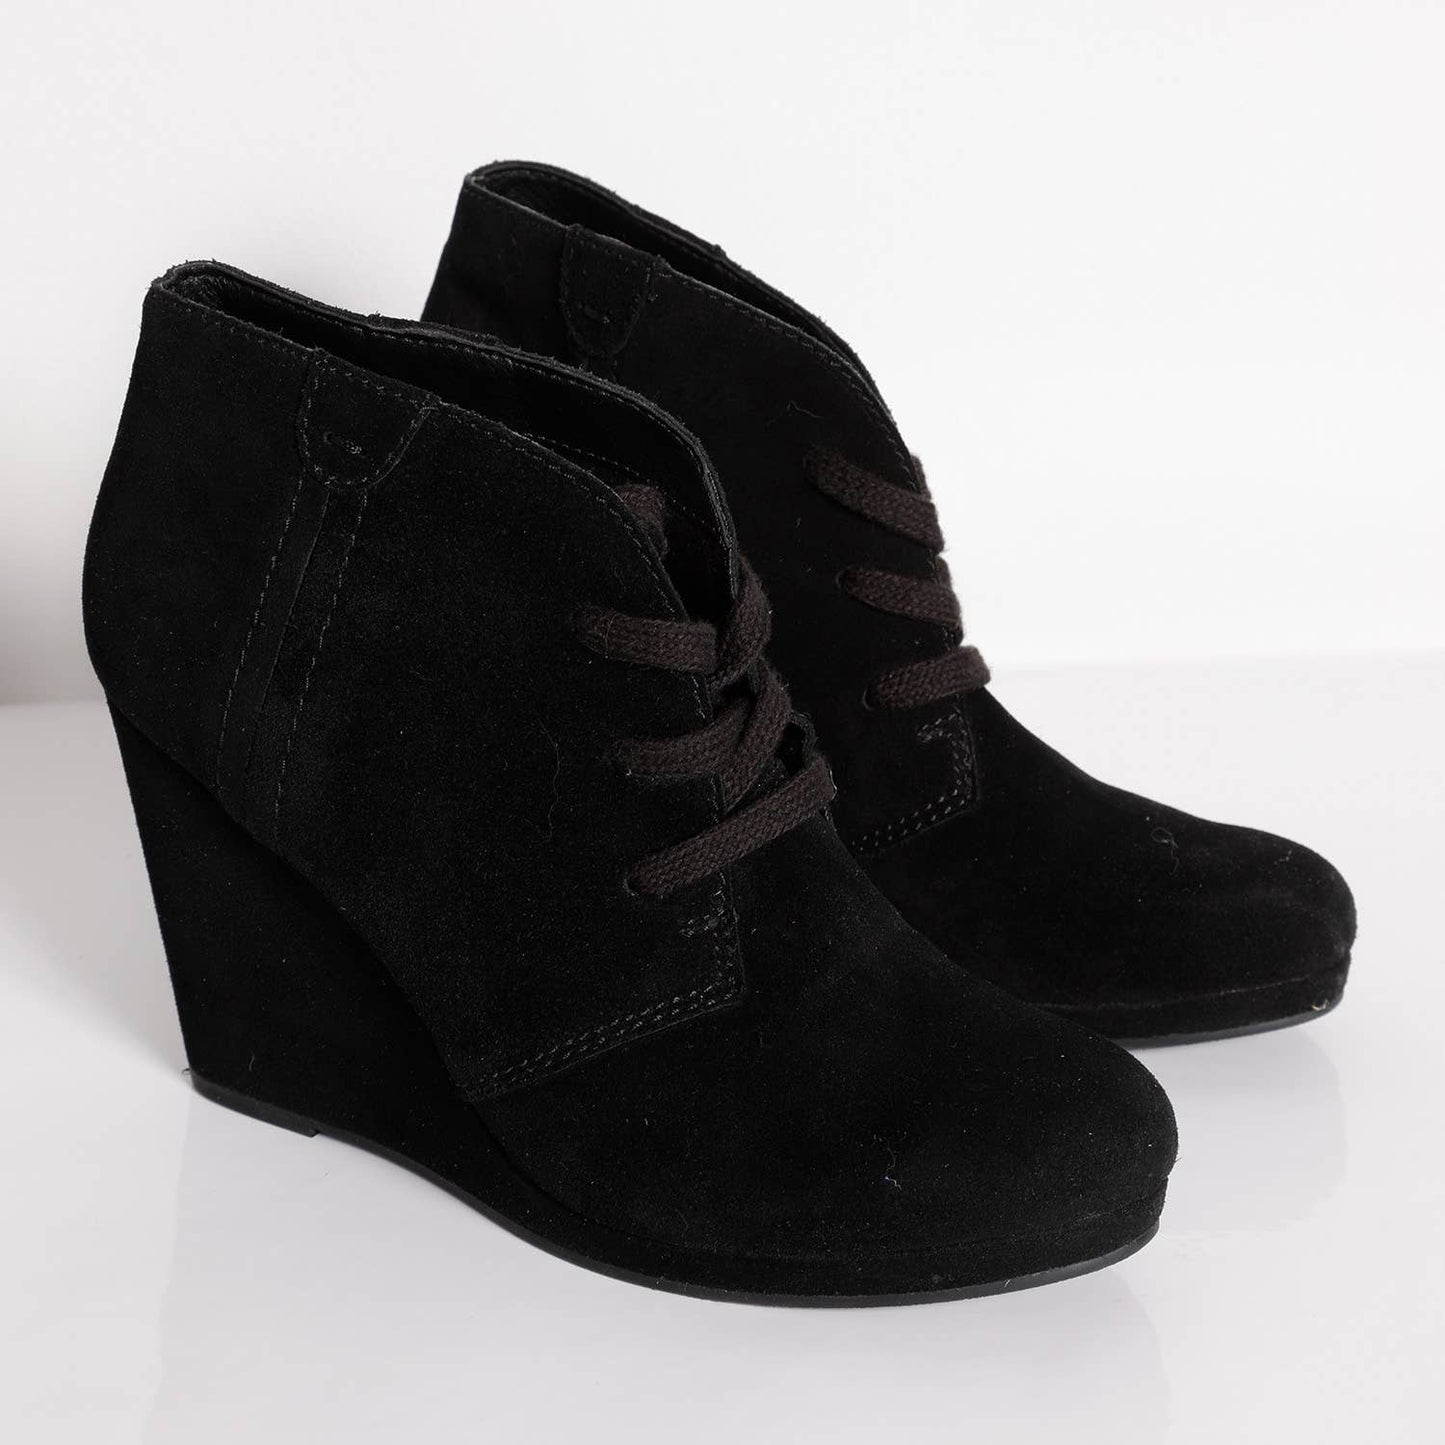 DOLCE VITA Black Suede Lace Up Ankle Wedge Boots